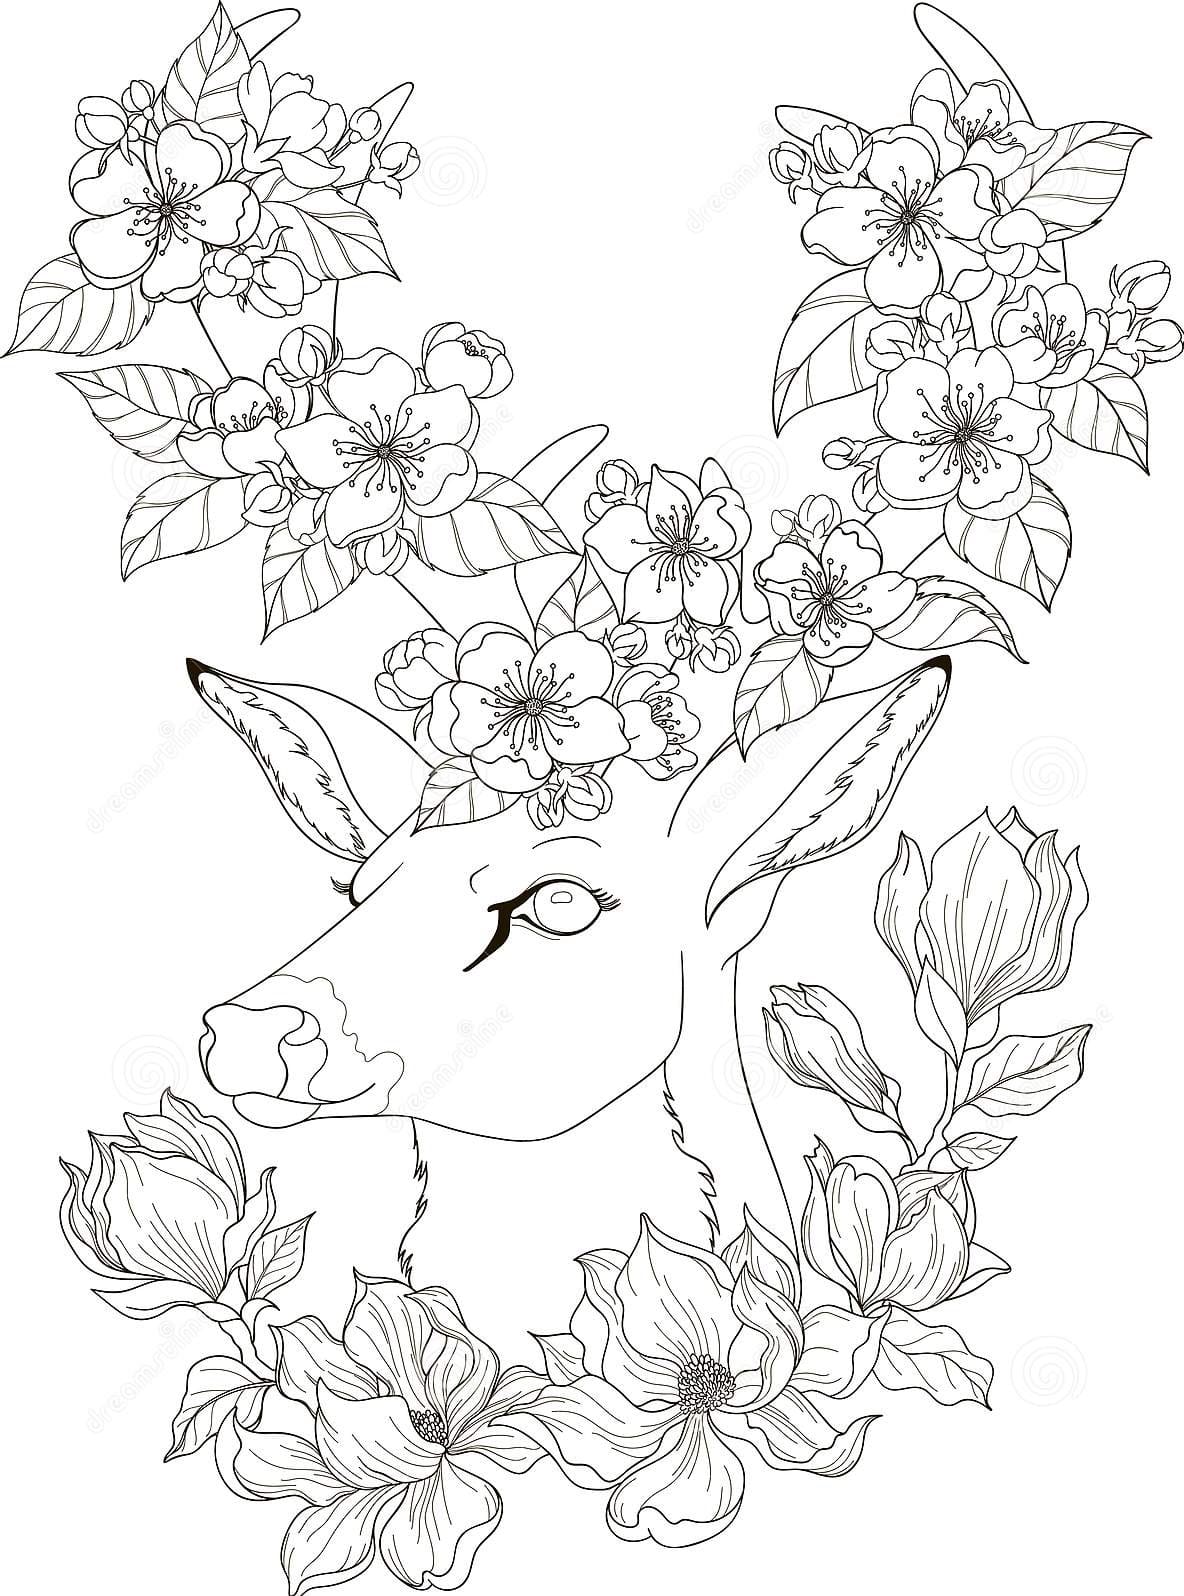 Drawing Deer With Magnolia And Apple Blossom Coloring Page